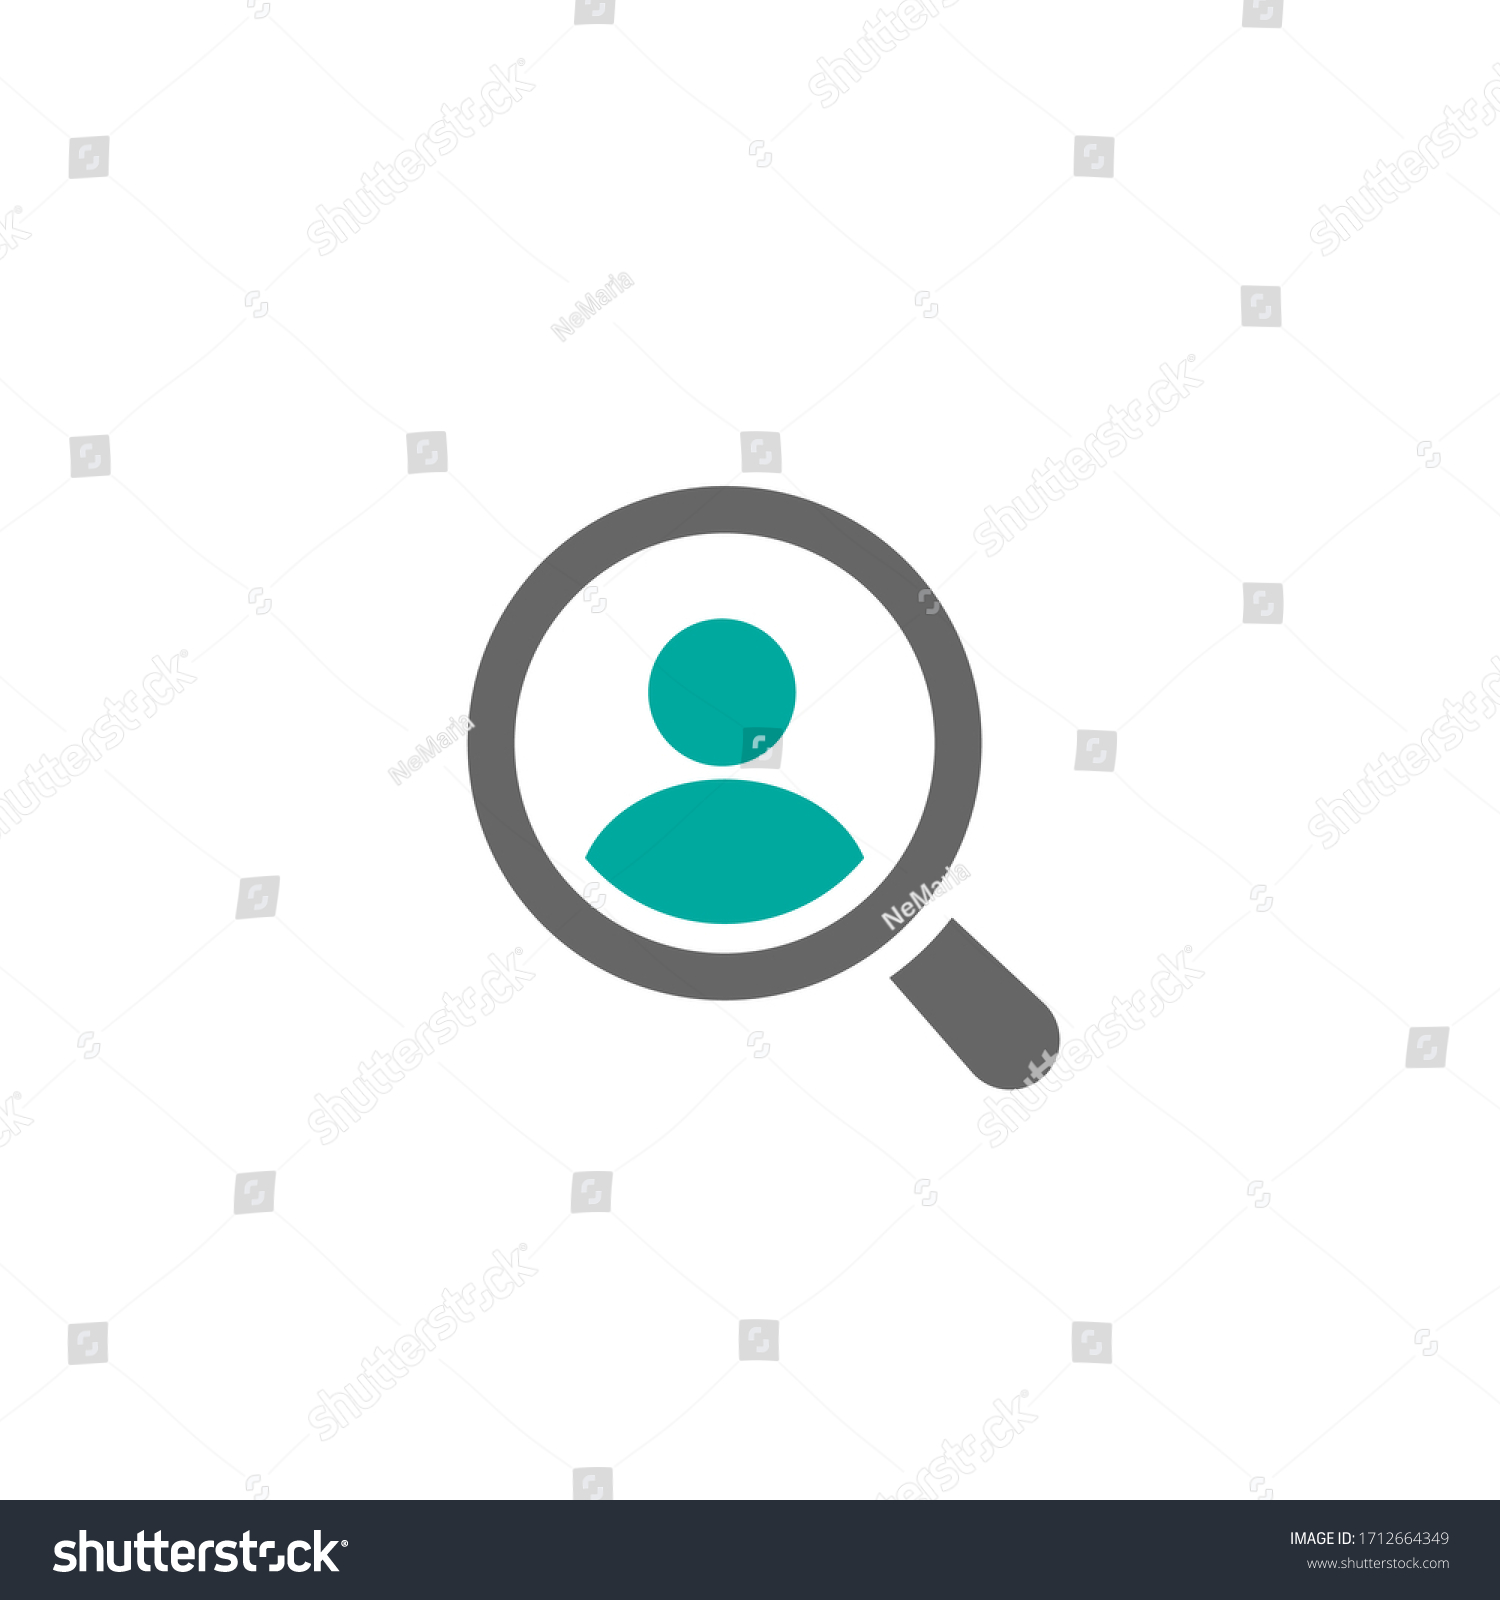 Recruitment icon. Magnifier with human  isolated on white. Magnifying glass icon. Find people, human research. Vector illustration. know your customer icon flat pictogram. #1712664349